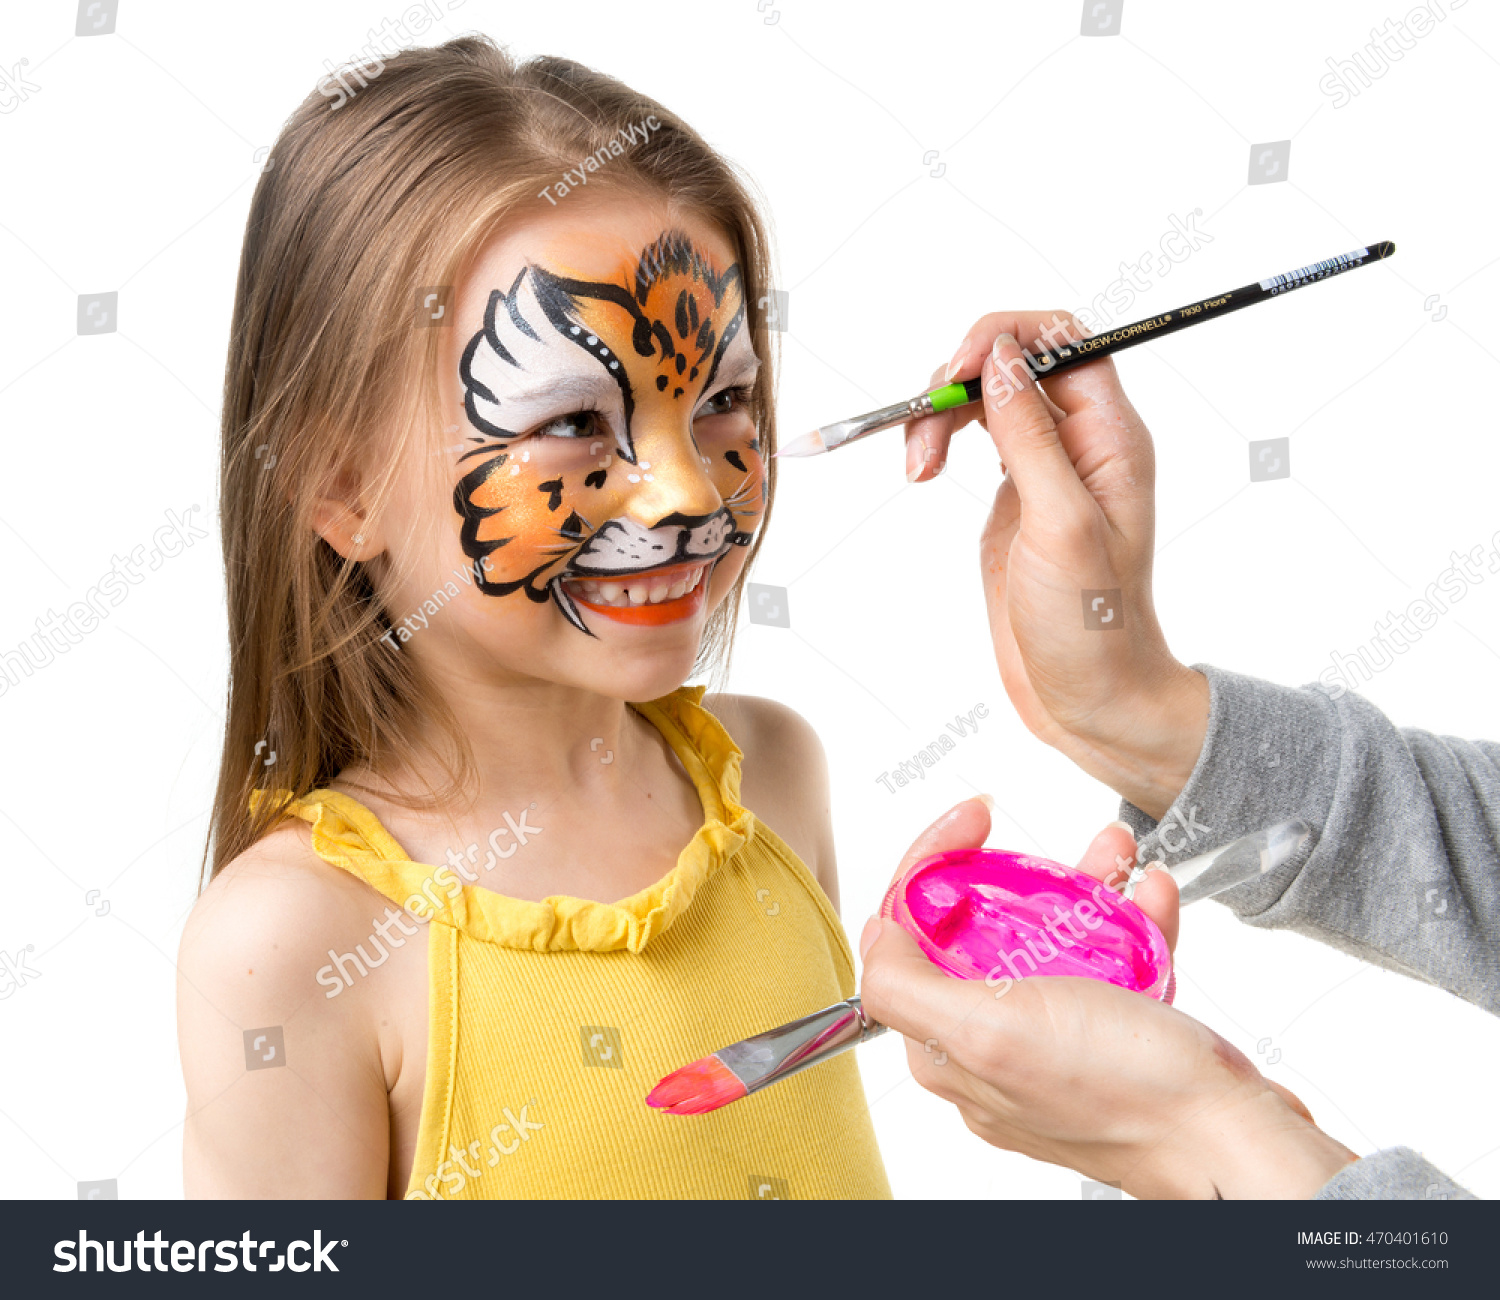 joyful little girl getting her face painted like tiger by artist #470401610